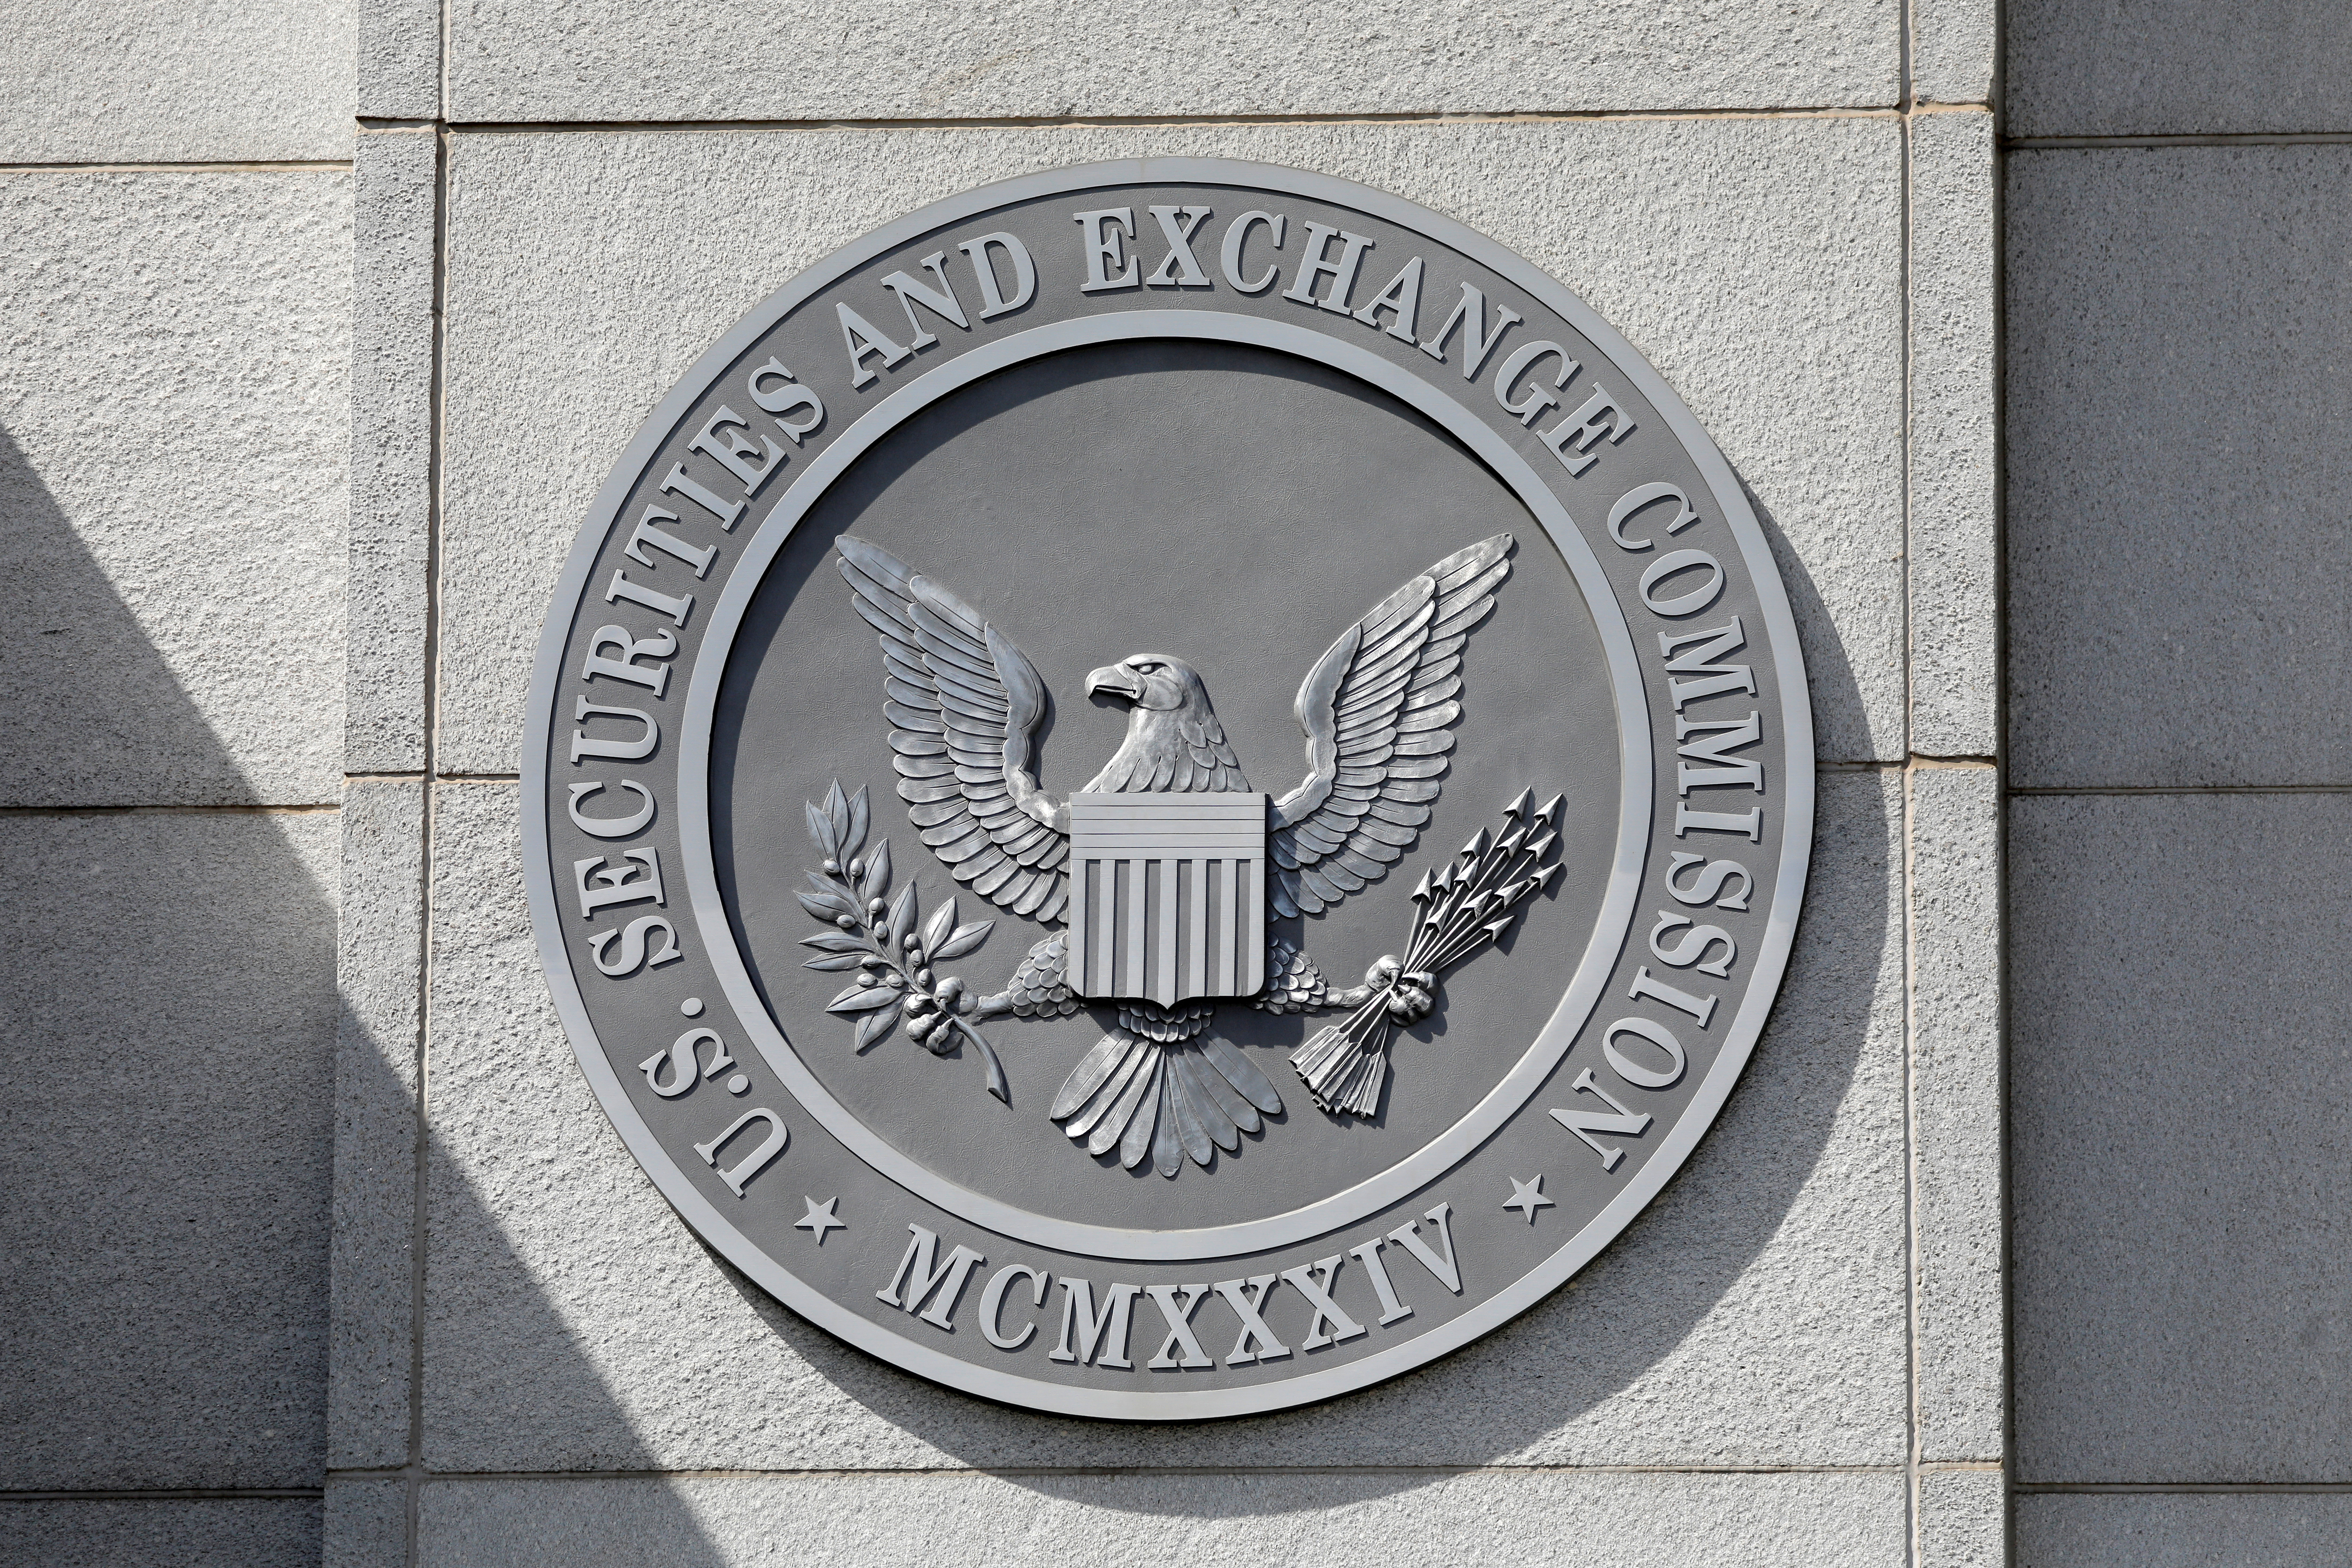 The seal of the U.S. Securities and Exchange Commission is seen at its headquarters in Washington, D.C.